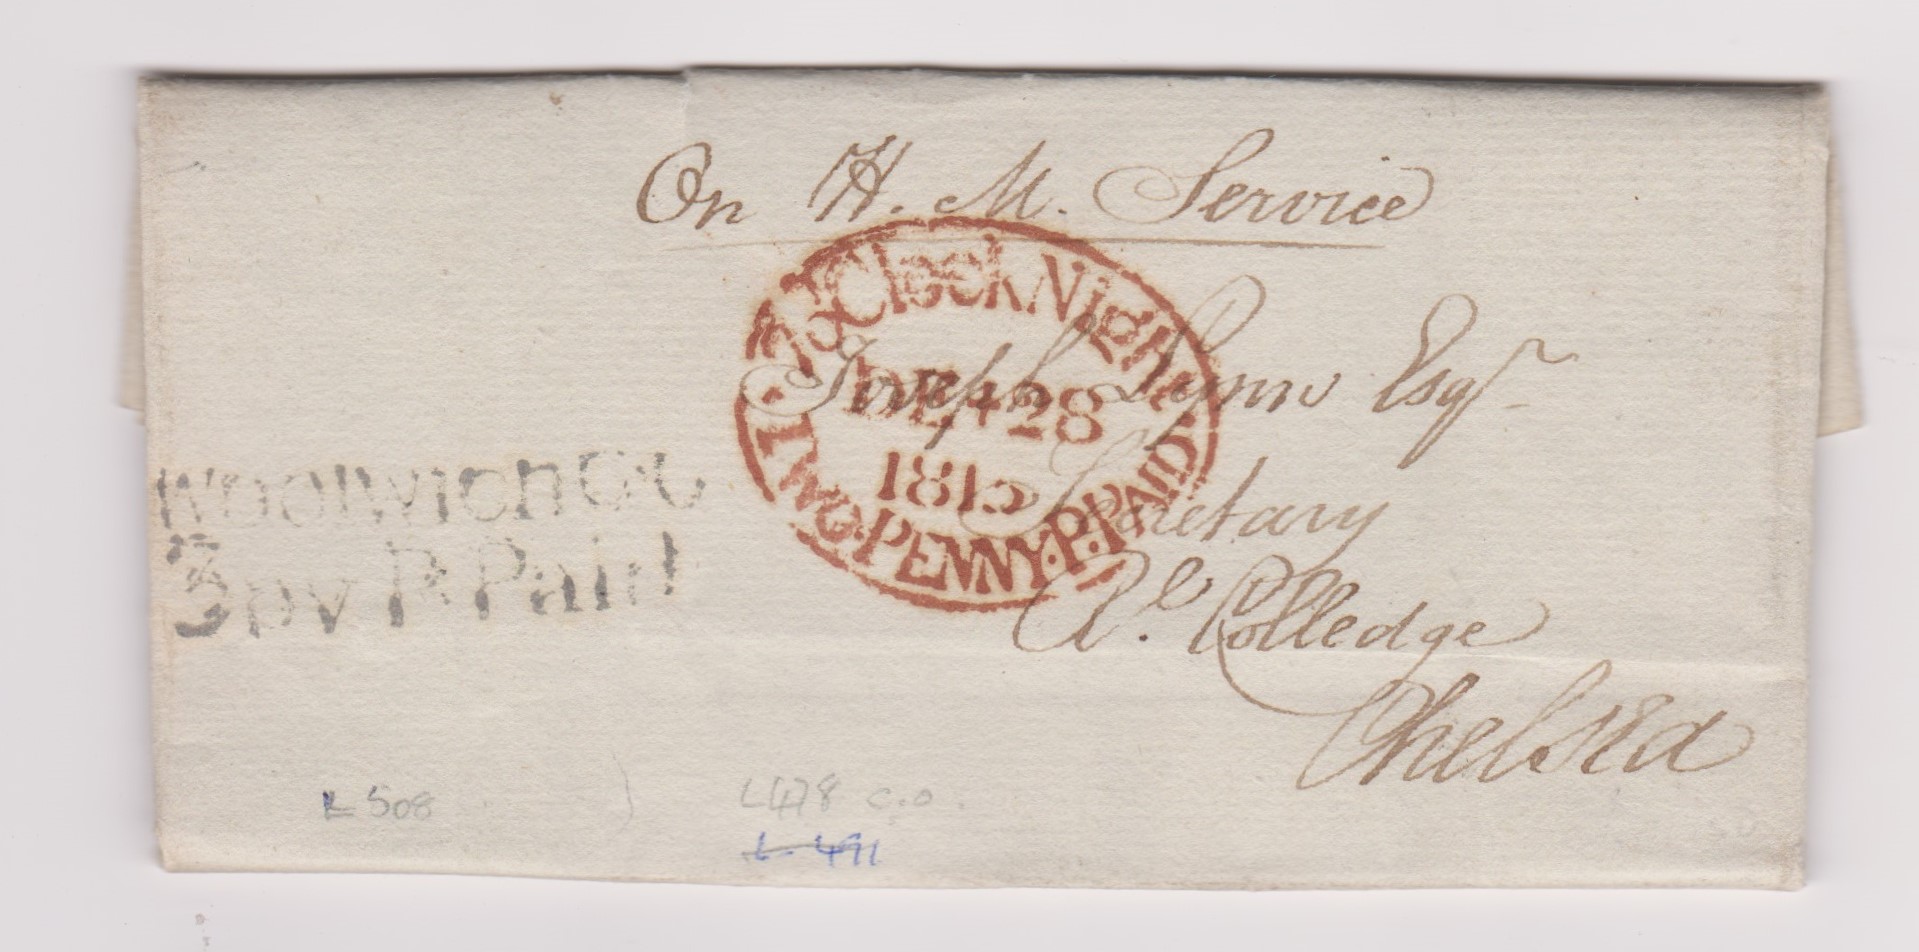 Great Britain 1815 Postal History - E.L. Dated Dec 28th 1815-Woolwich pisted to Chelsea-black 2 line